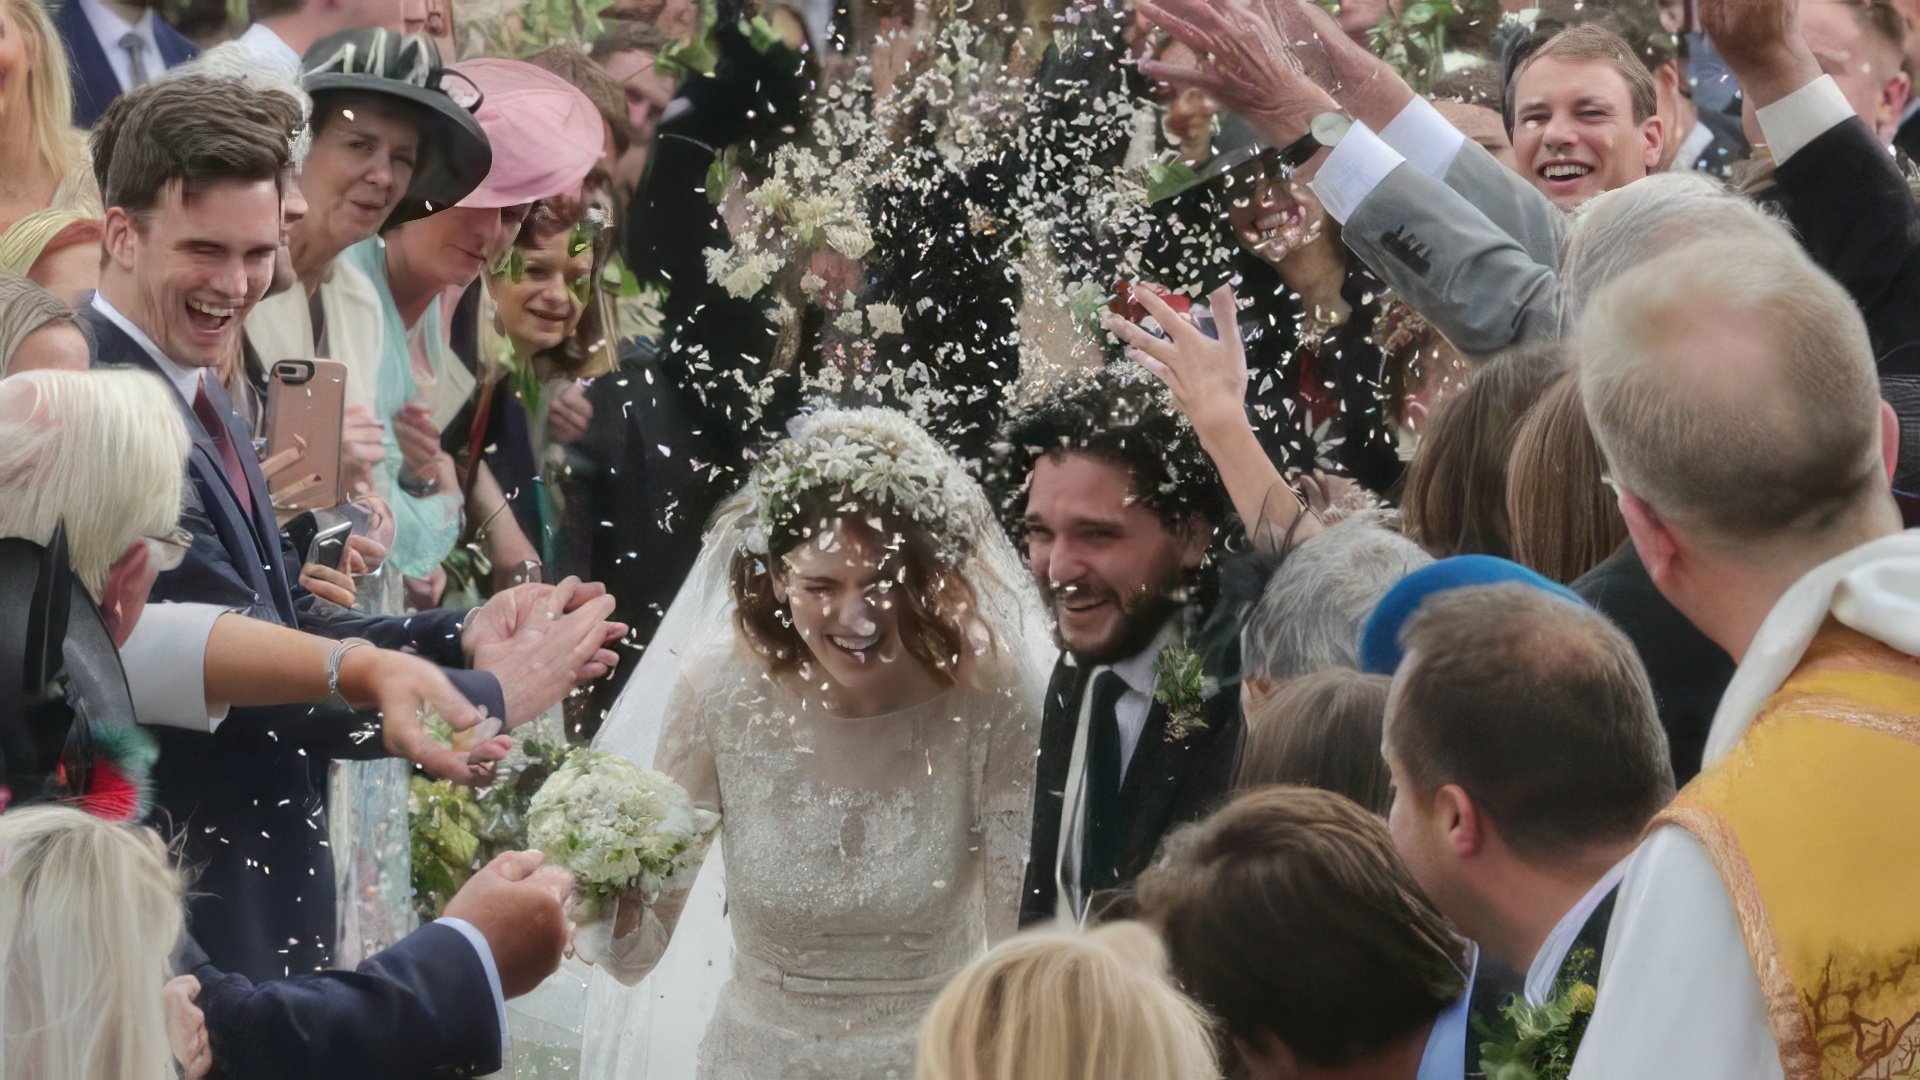 The wedding of Rose Leslie and Kit Harington